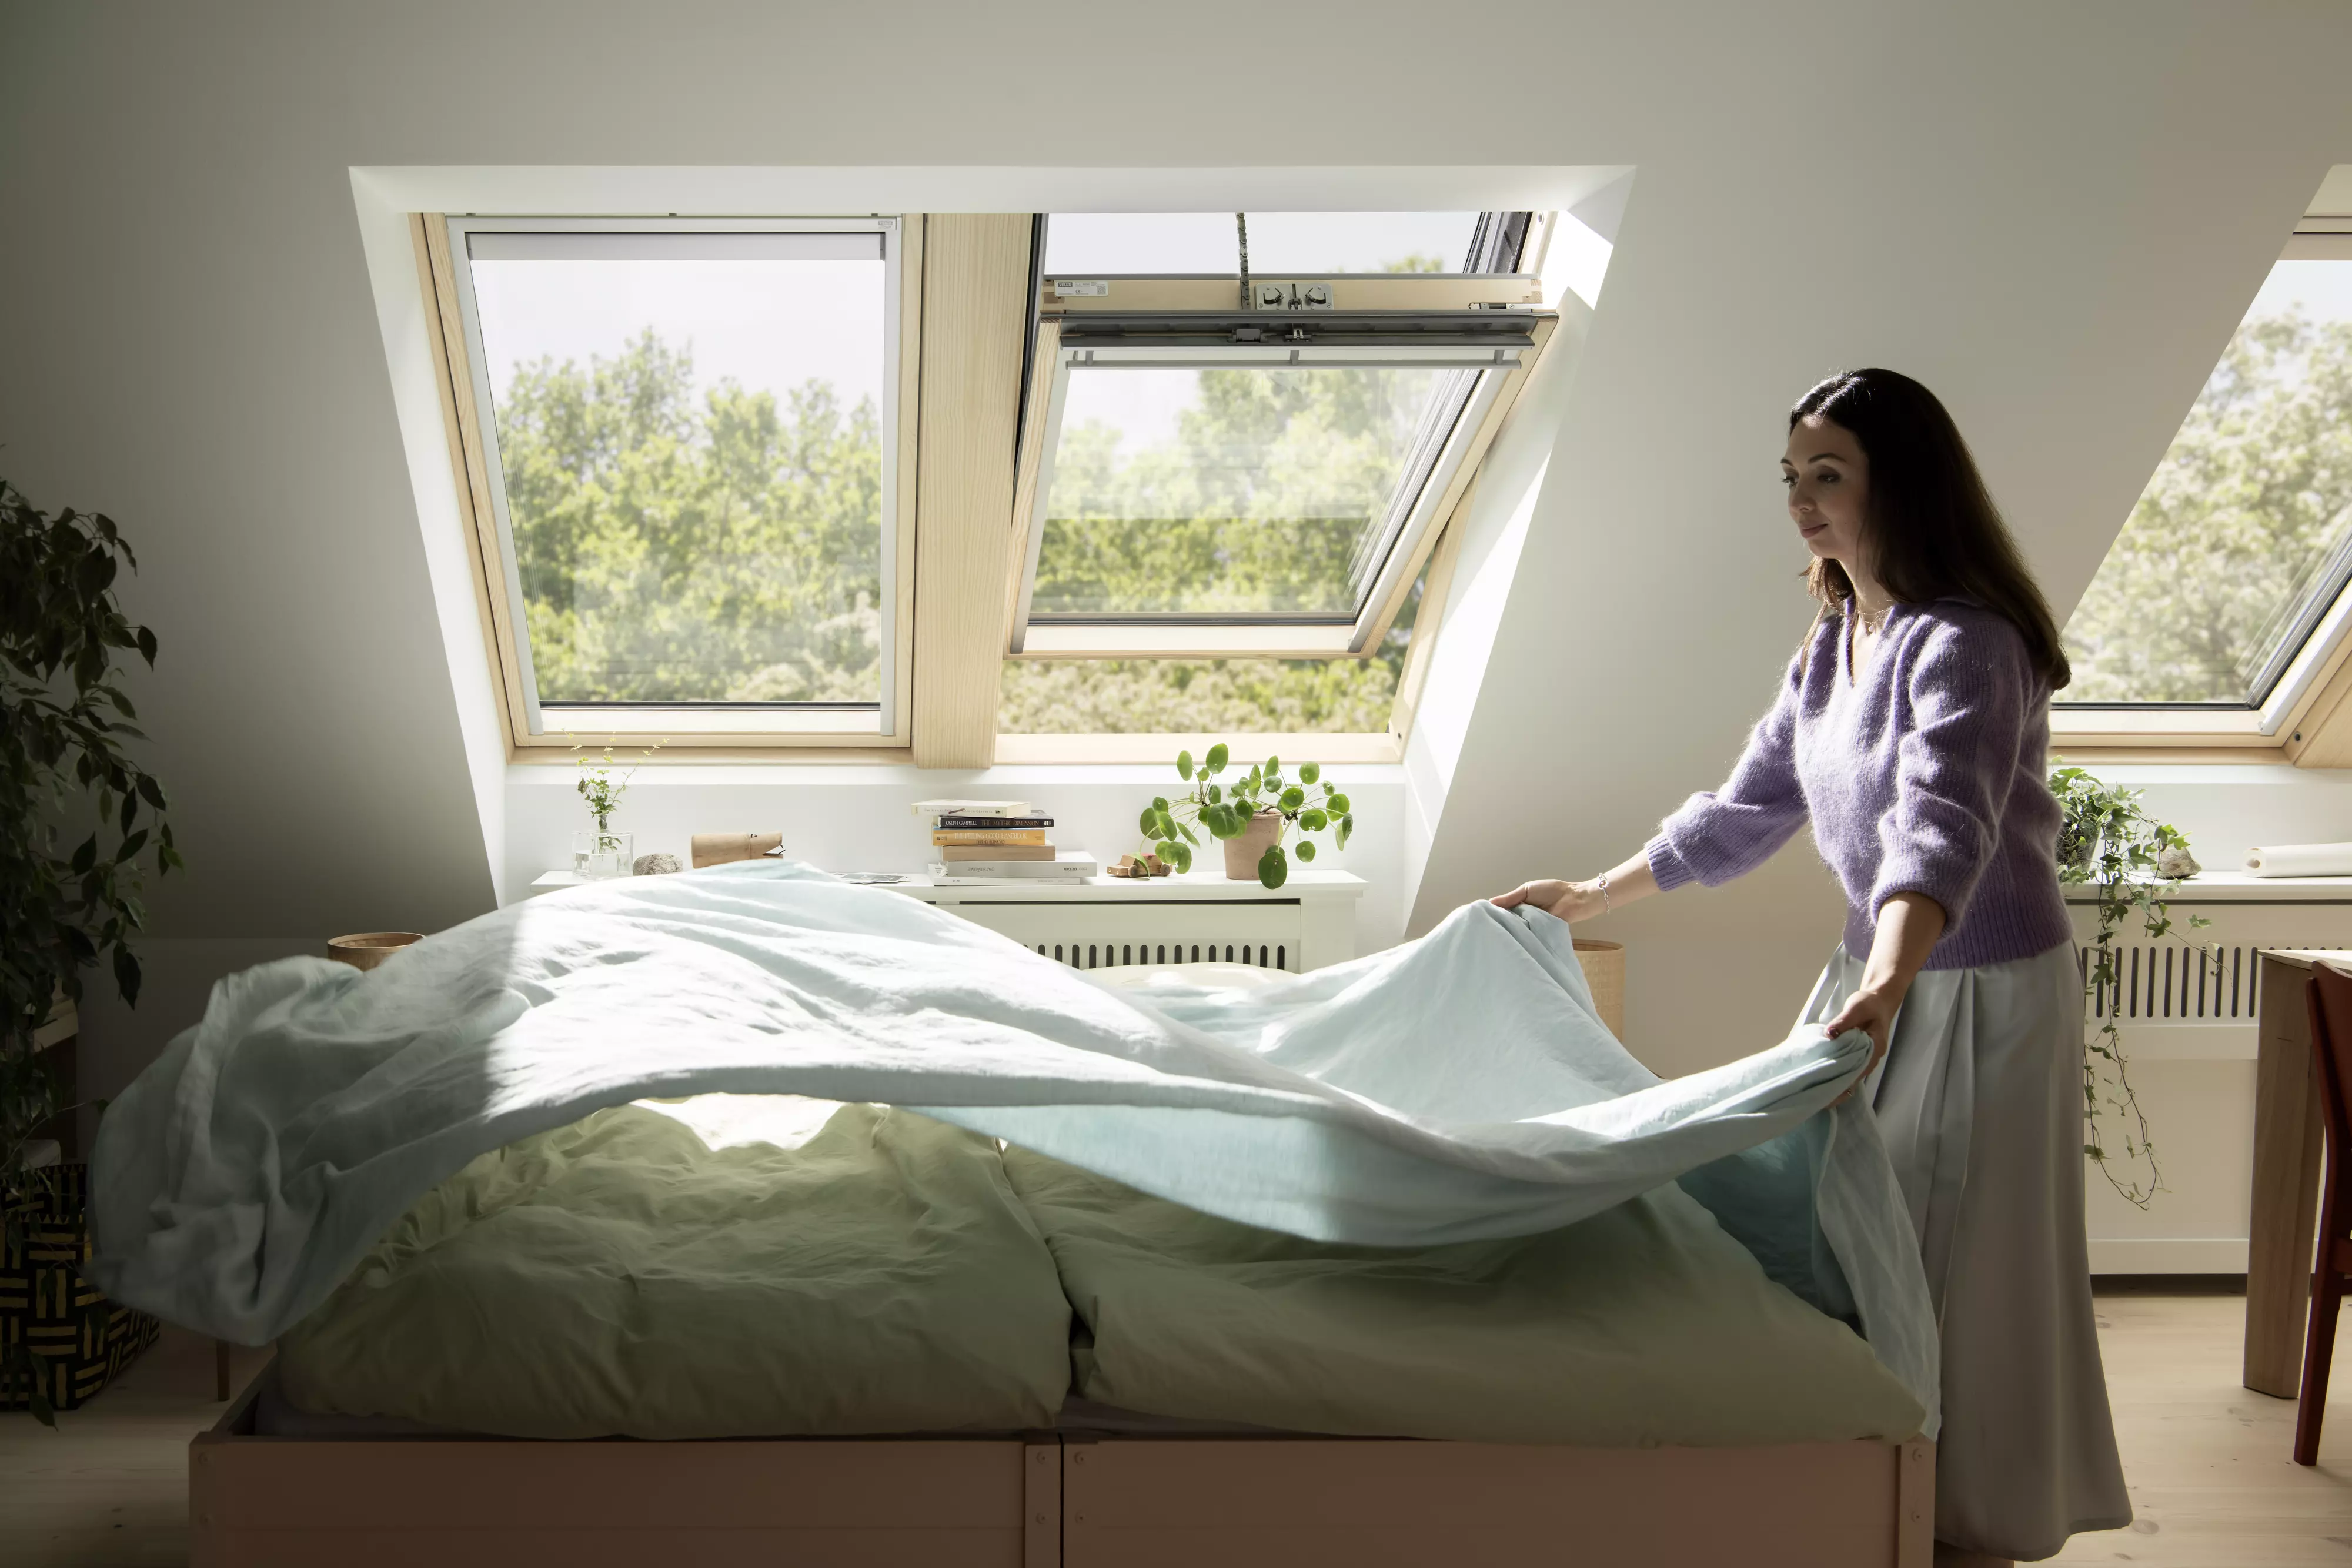 Bright bedroom with open VELUX roof windows and a person arranging the bed.